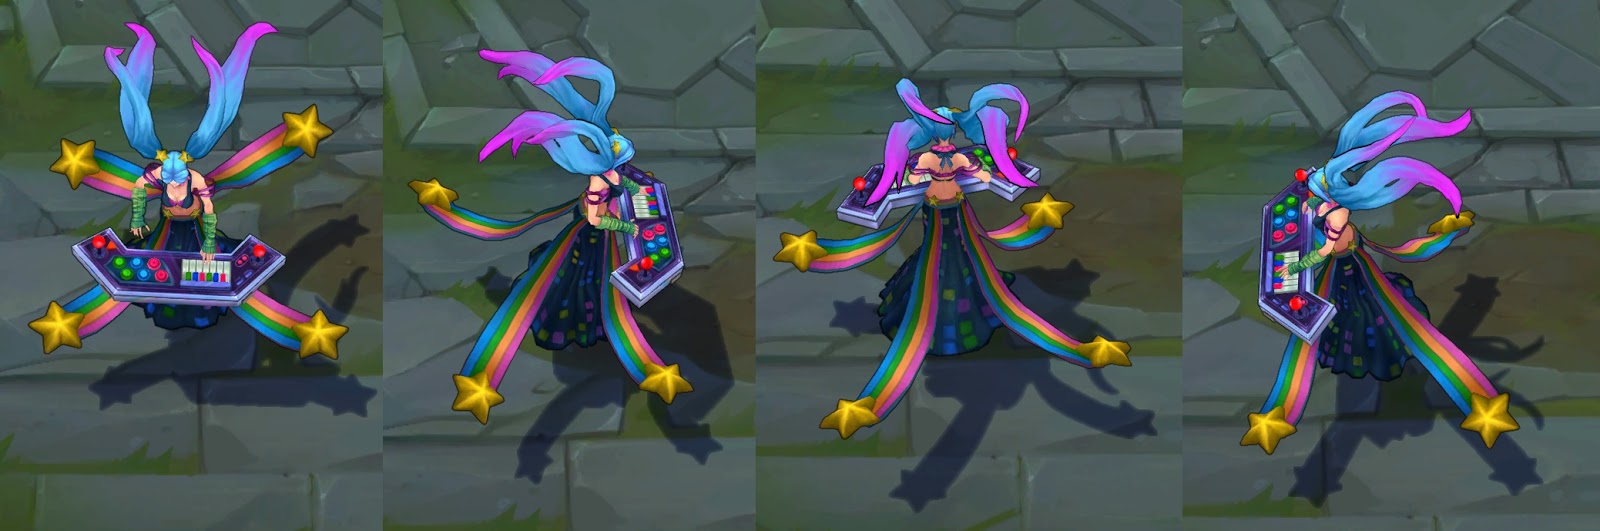 Surrender At 20 7 18 Pbe Update Guqin And Arcade Sona Updates New Sona Ult Vfx Lots Of Balance Changes And More